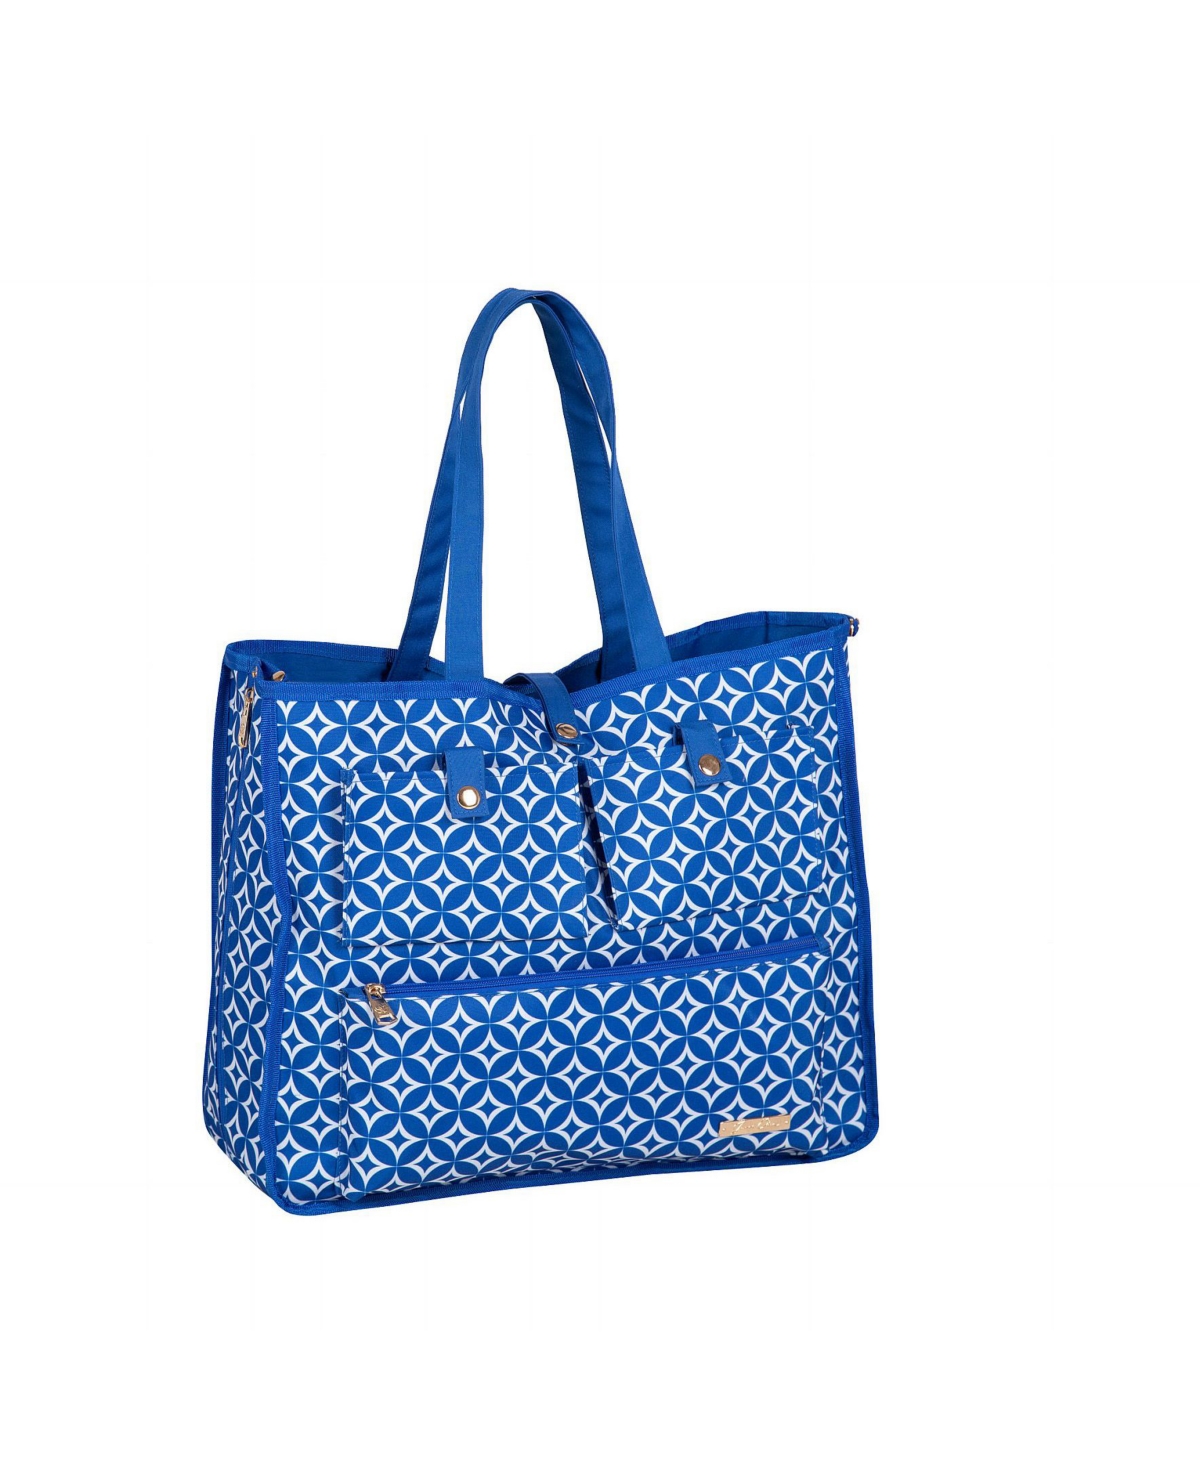 Stars Reversible 2-In-1 Carry-All Tote - Blue